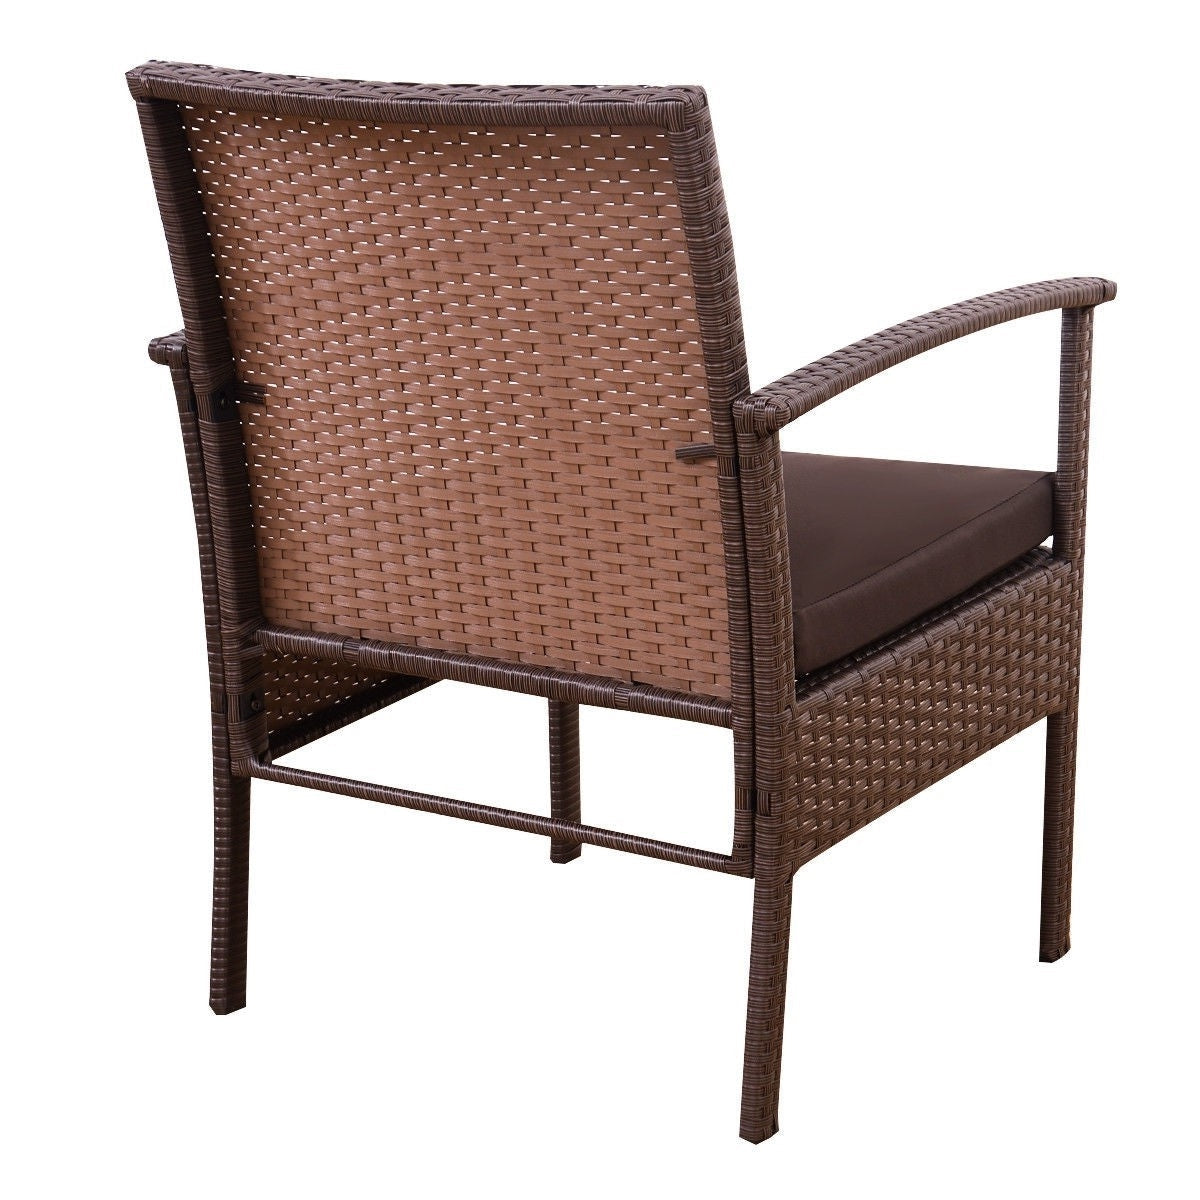 Outdoor > Outdoor Furniture > Patio Furniture Sets - Brown 4-Piece Outdoor Rattan Patio Furniture Set